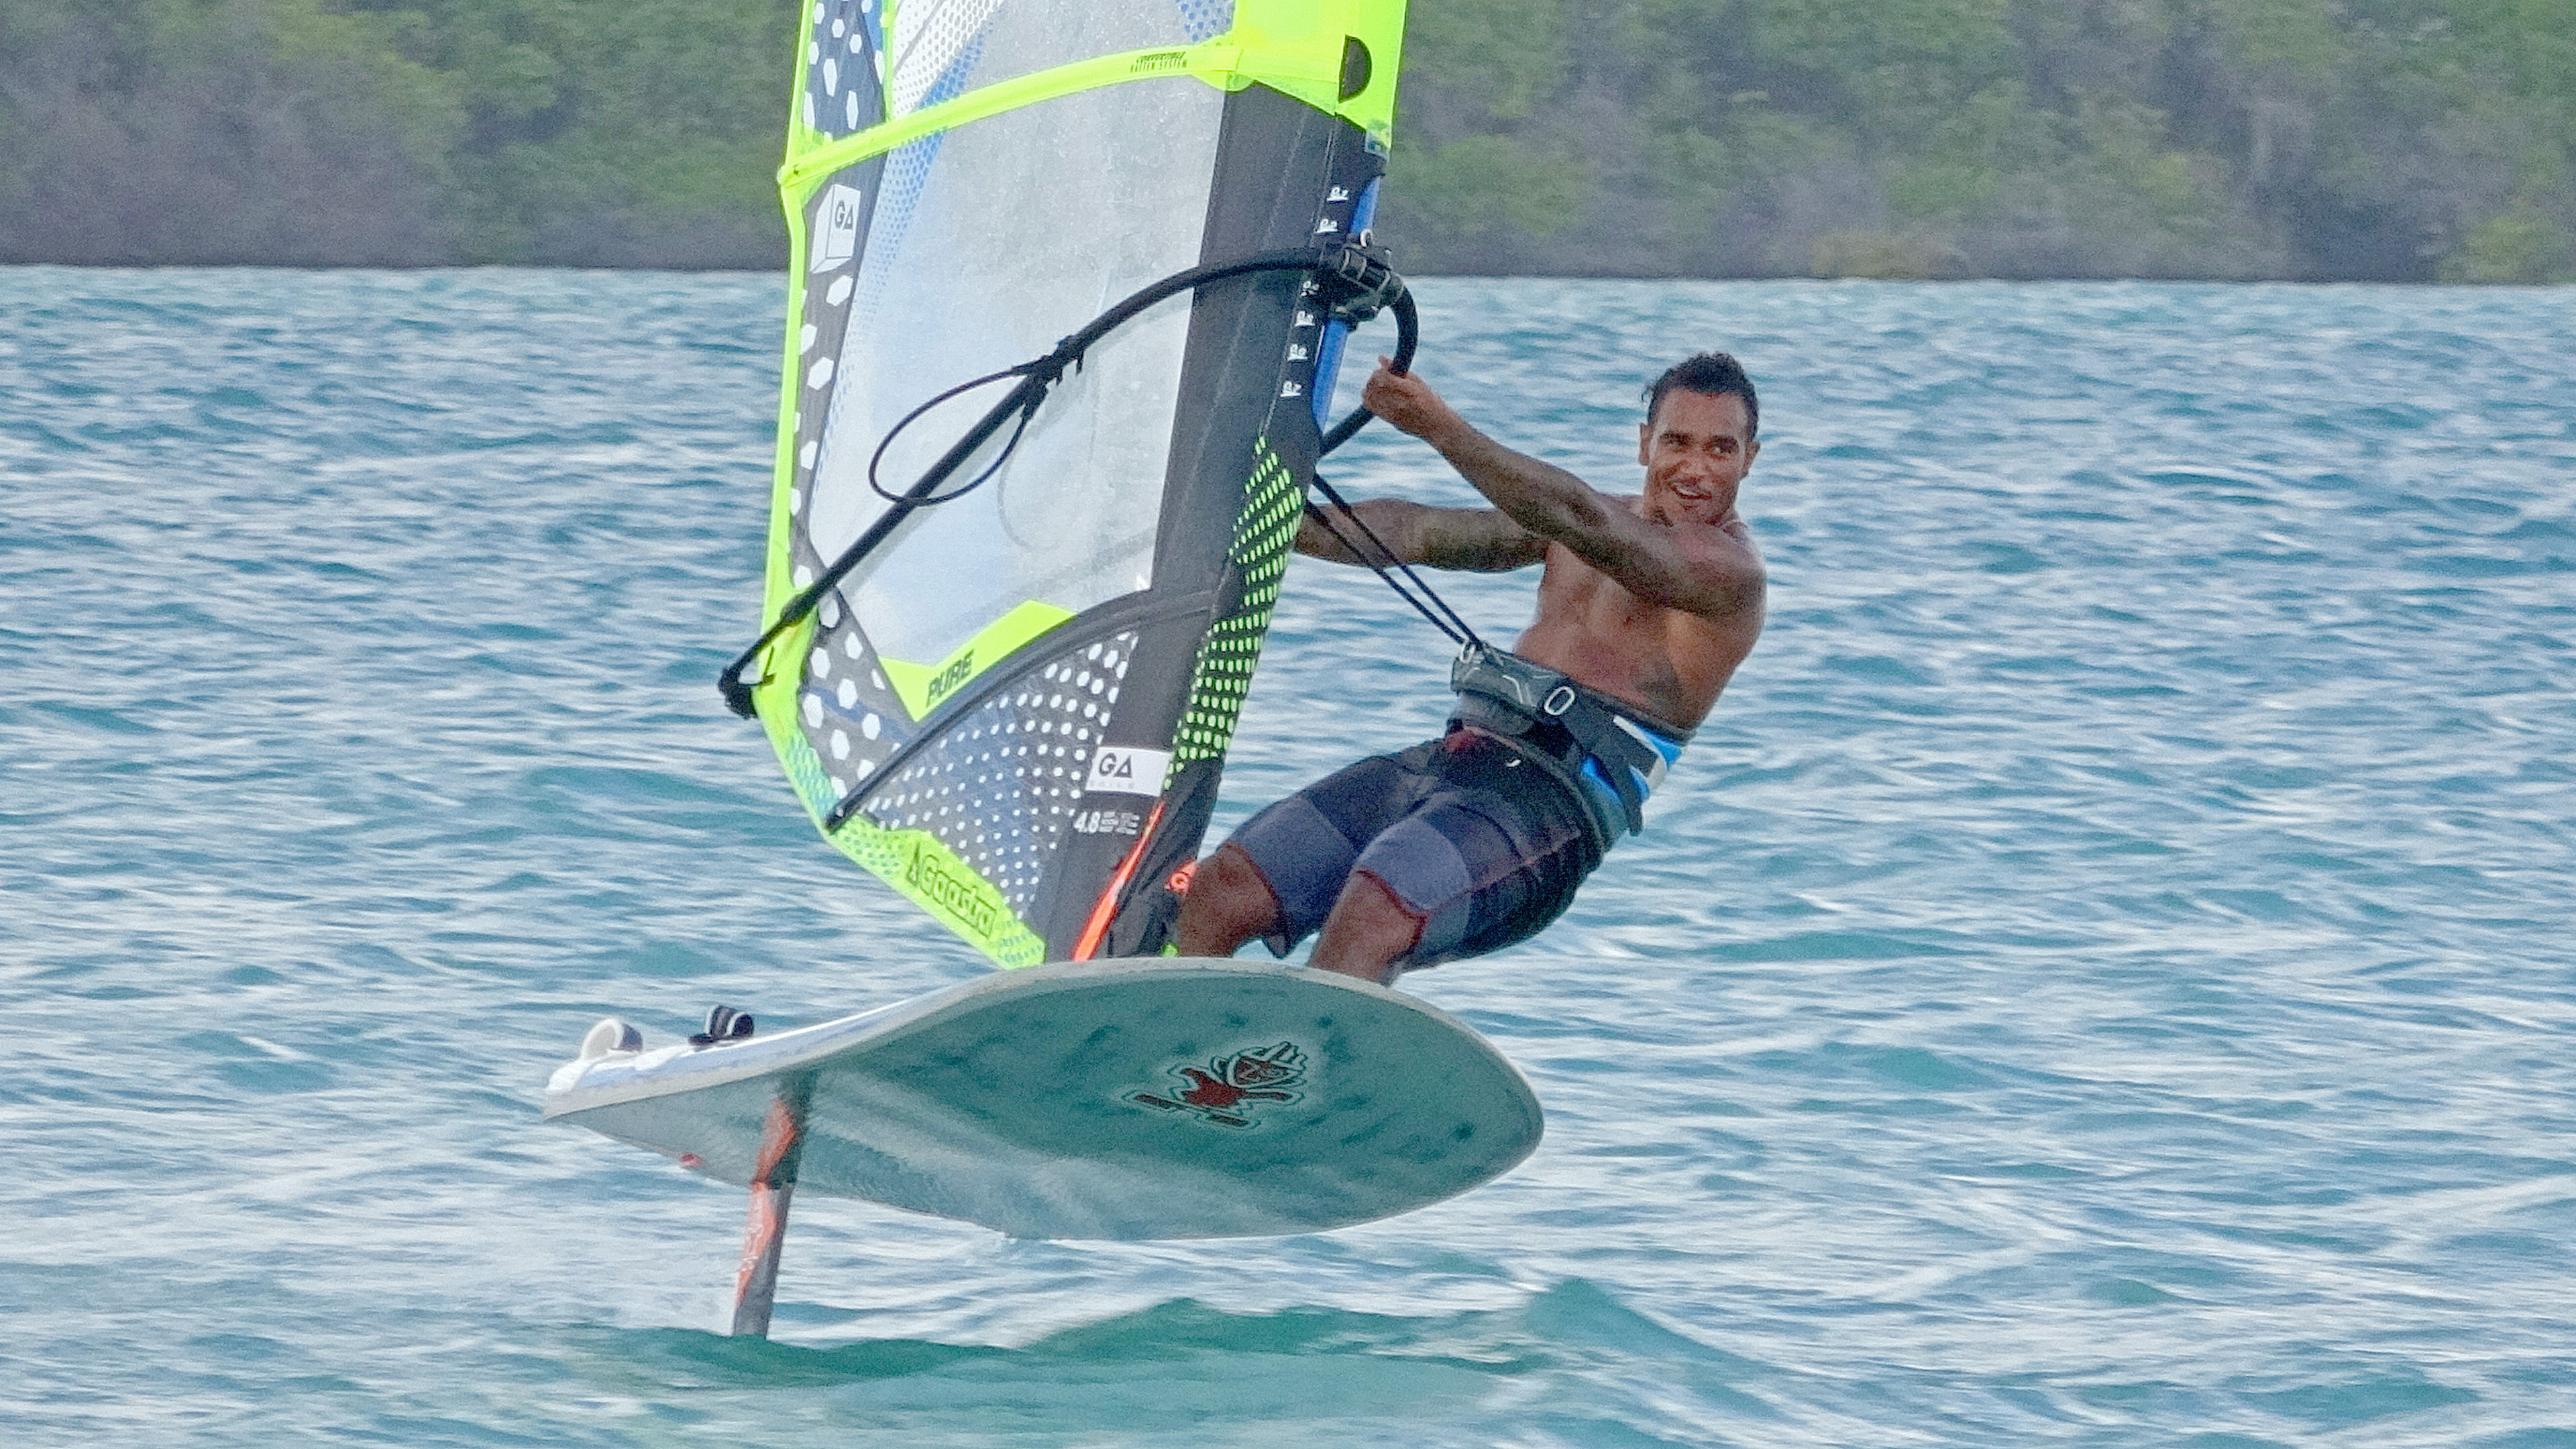 Windsurfing: Wing Foiling on Island Bonaire, 2022, Goya and Starboard boards, Simmer Sails. 3840x2160 4K Wallpaper.